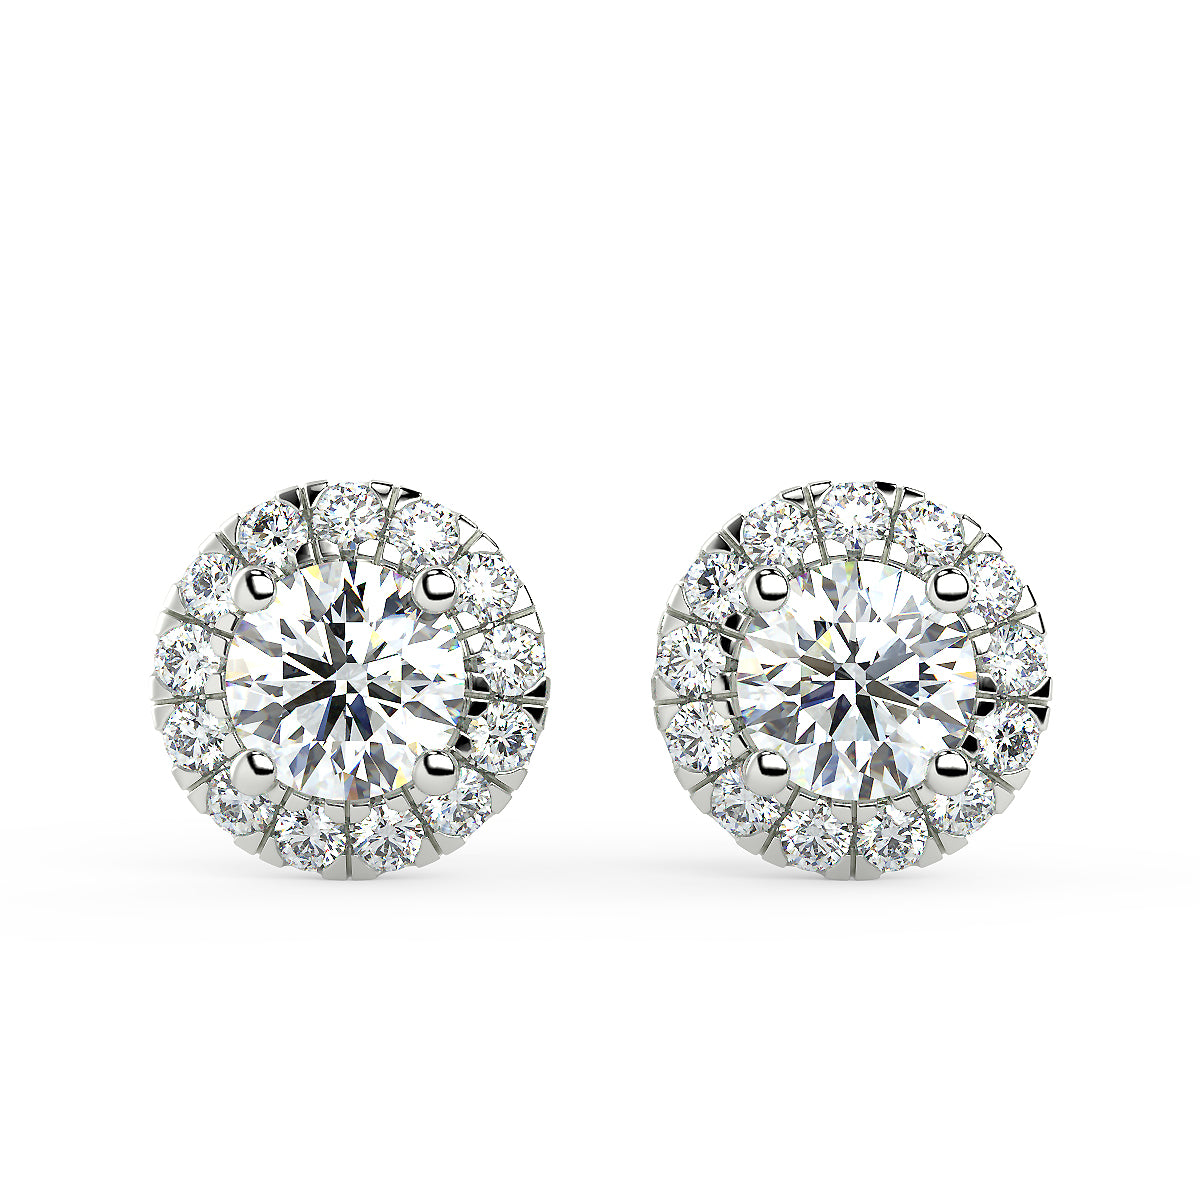 Cassiopeia Stud Earrings in White Gold (1.40 Ct. Tw.)